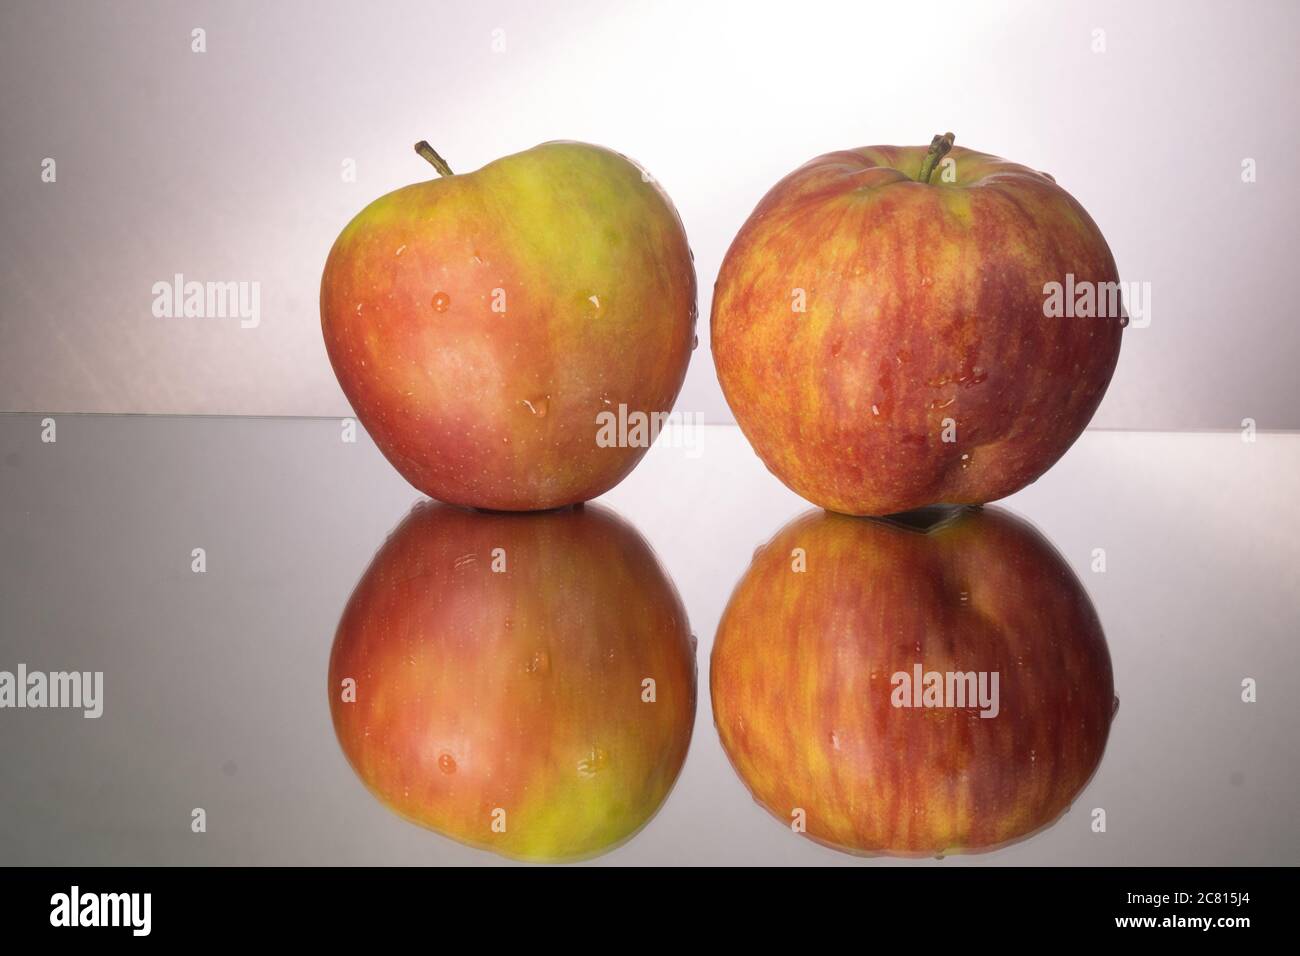 red apple on mirroring table. Gorizontal image with copy space. Stock Photo